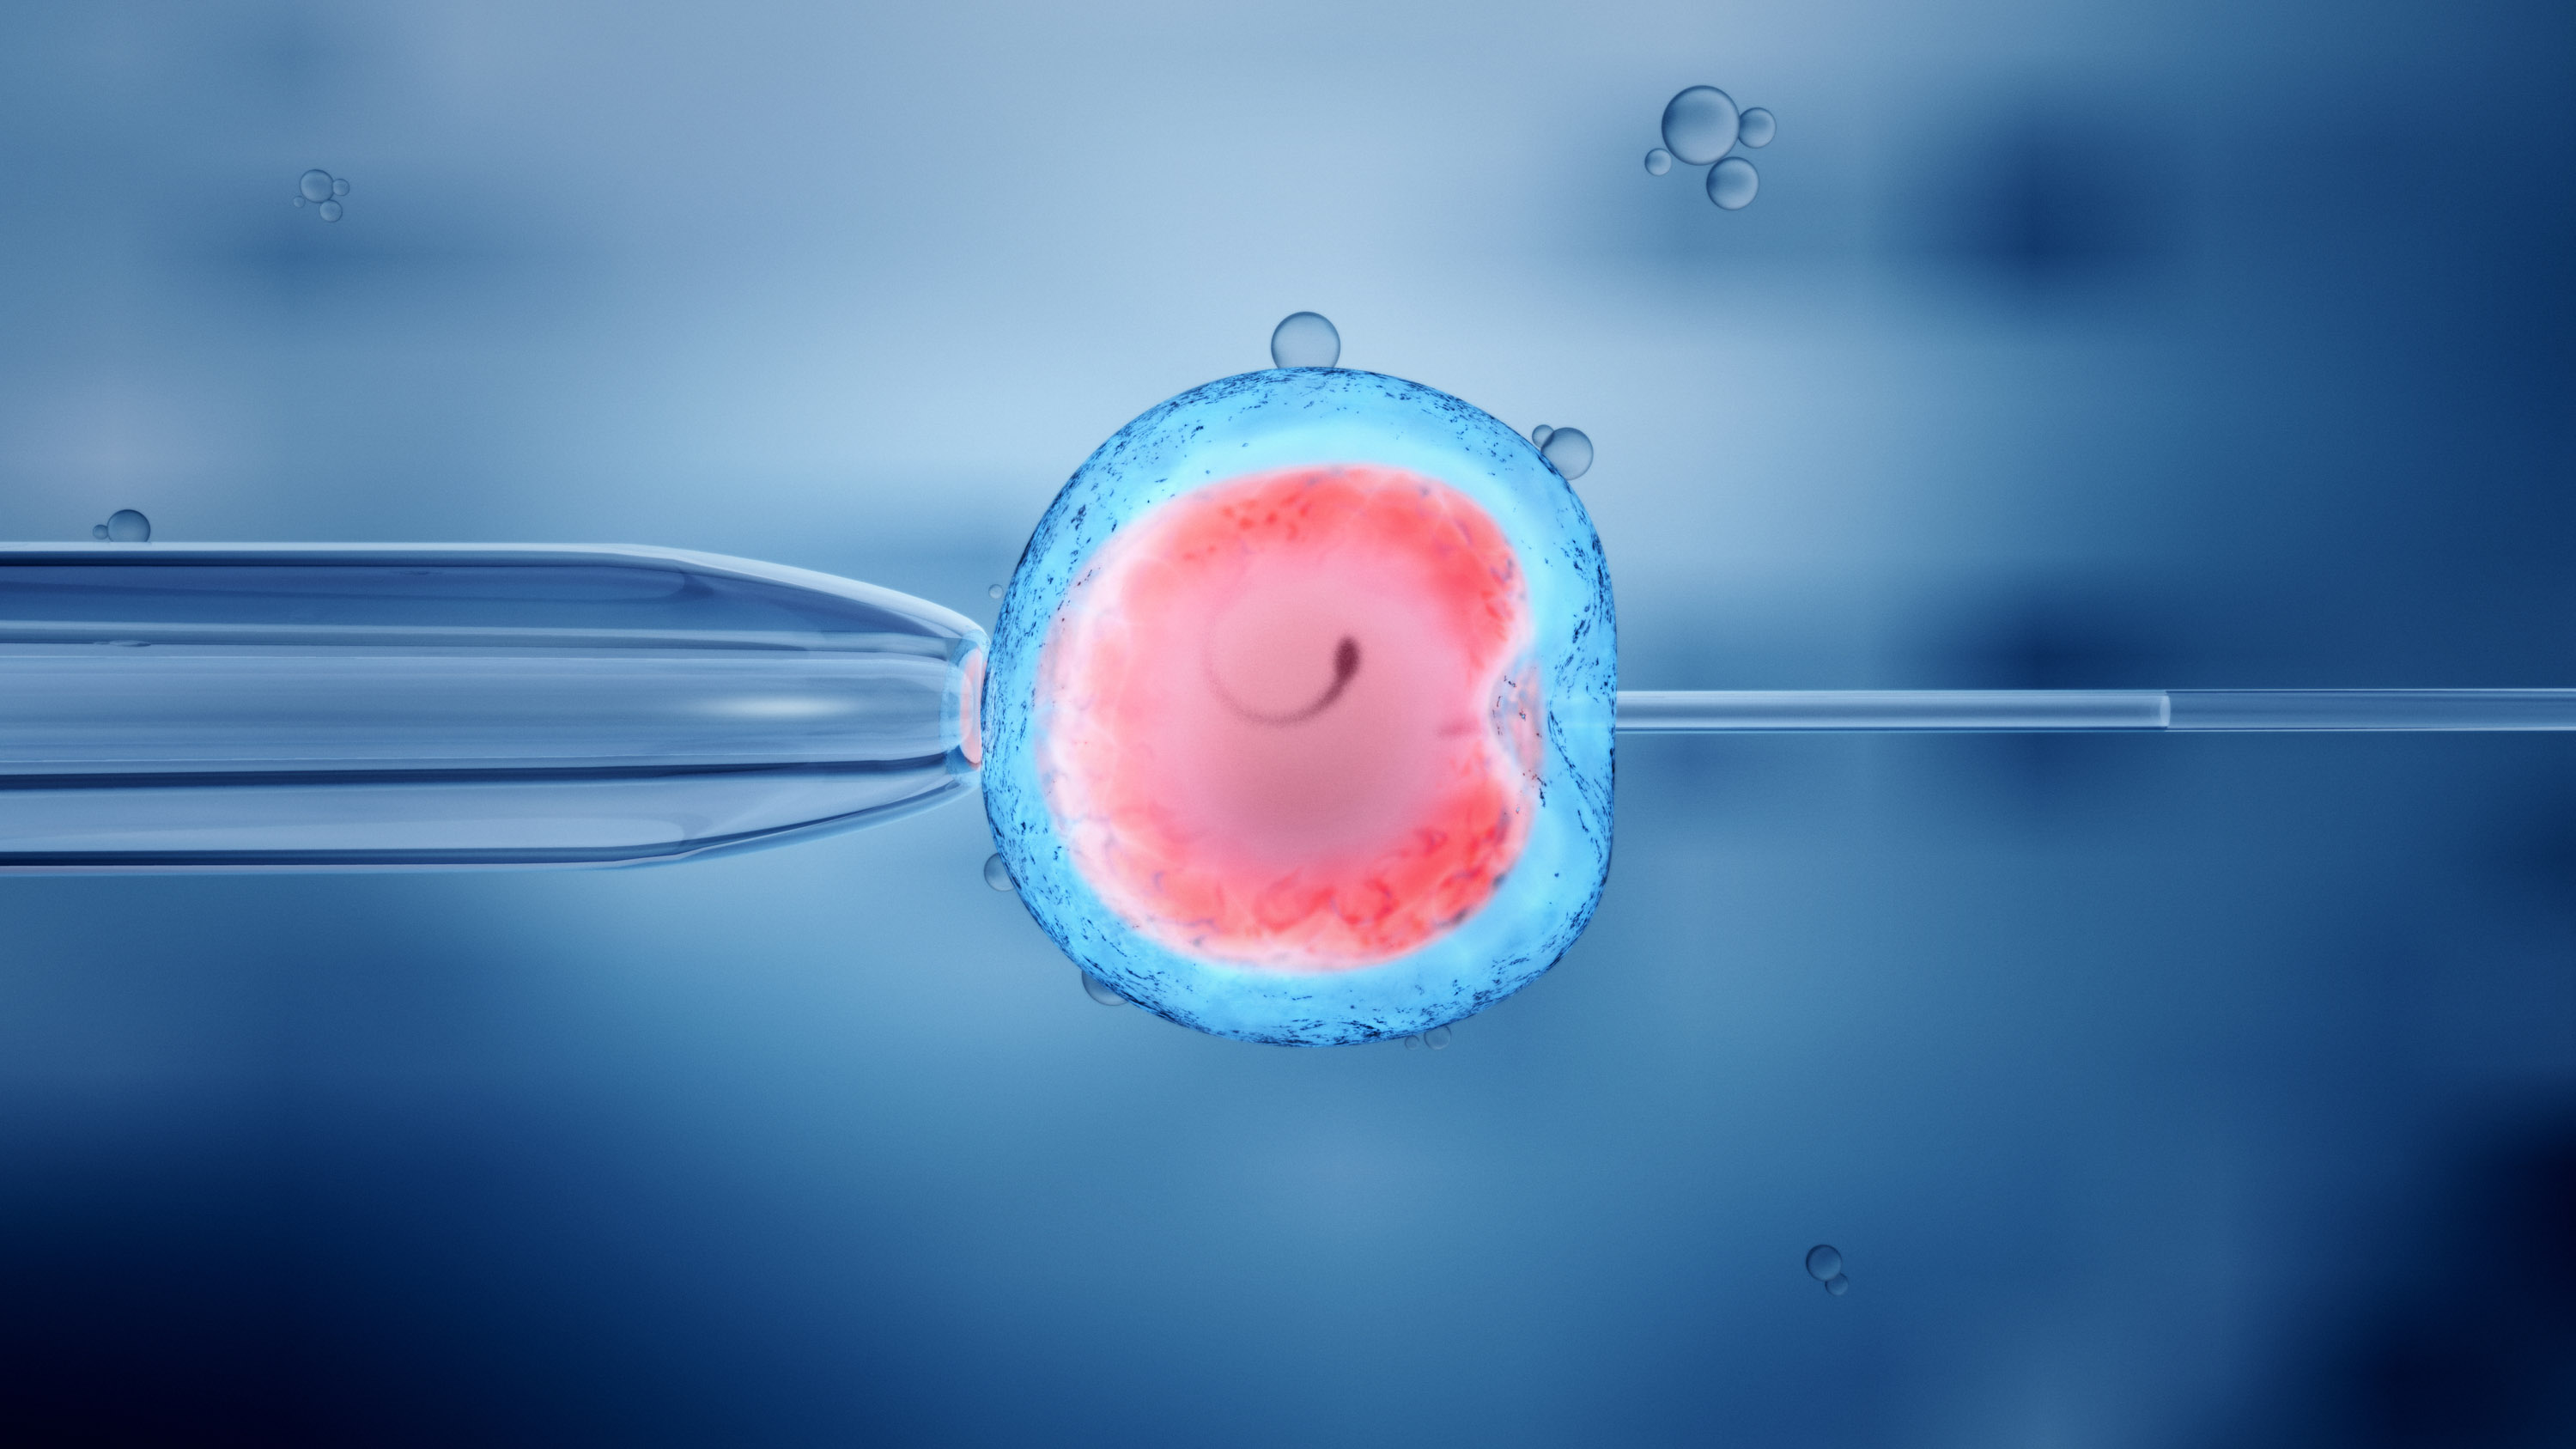 illustration of ivf with donor egg membrane in blue and nucleus in red